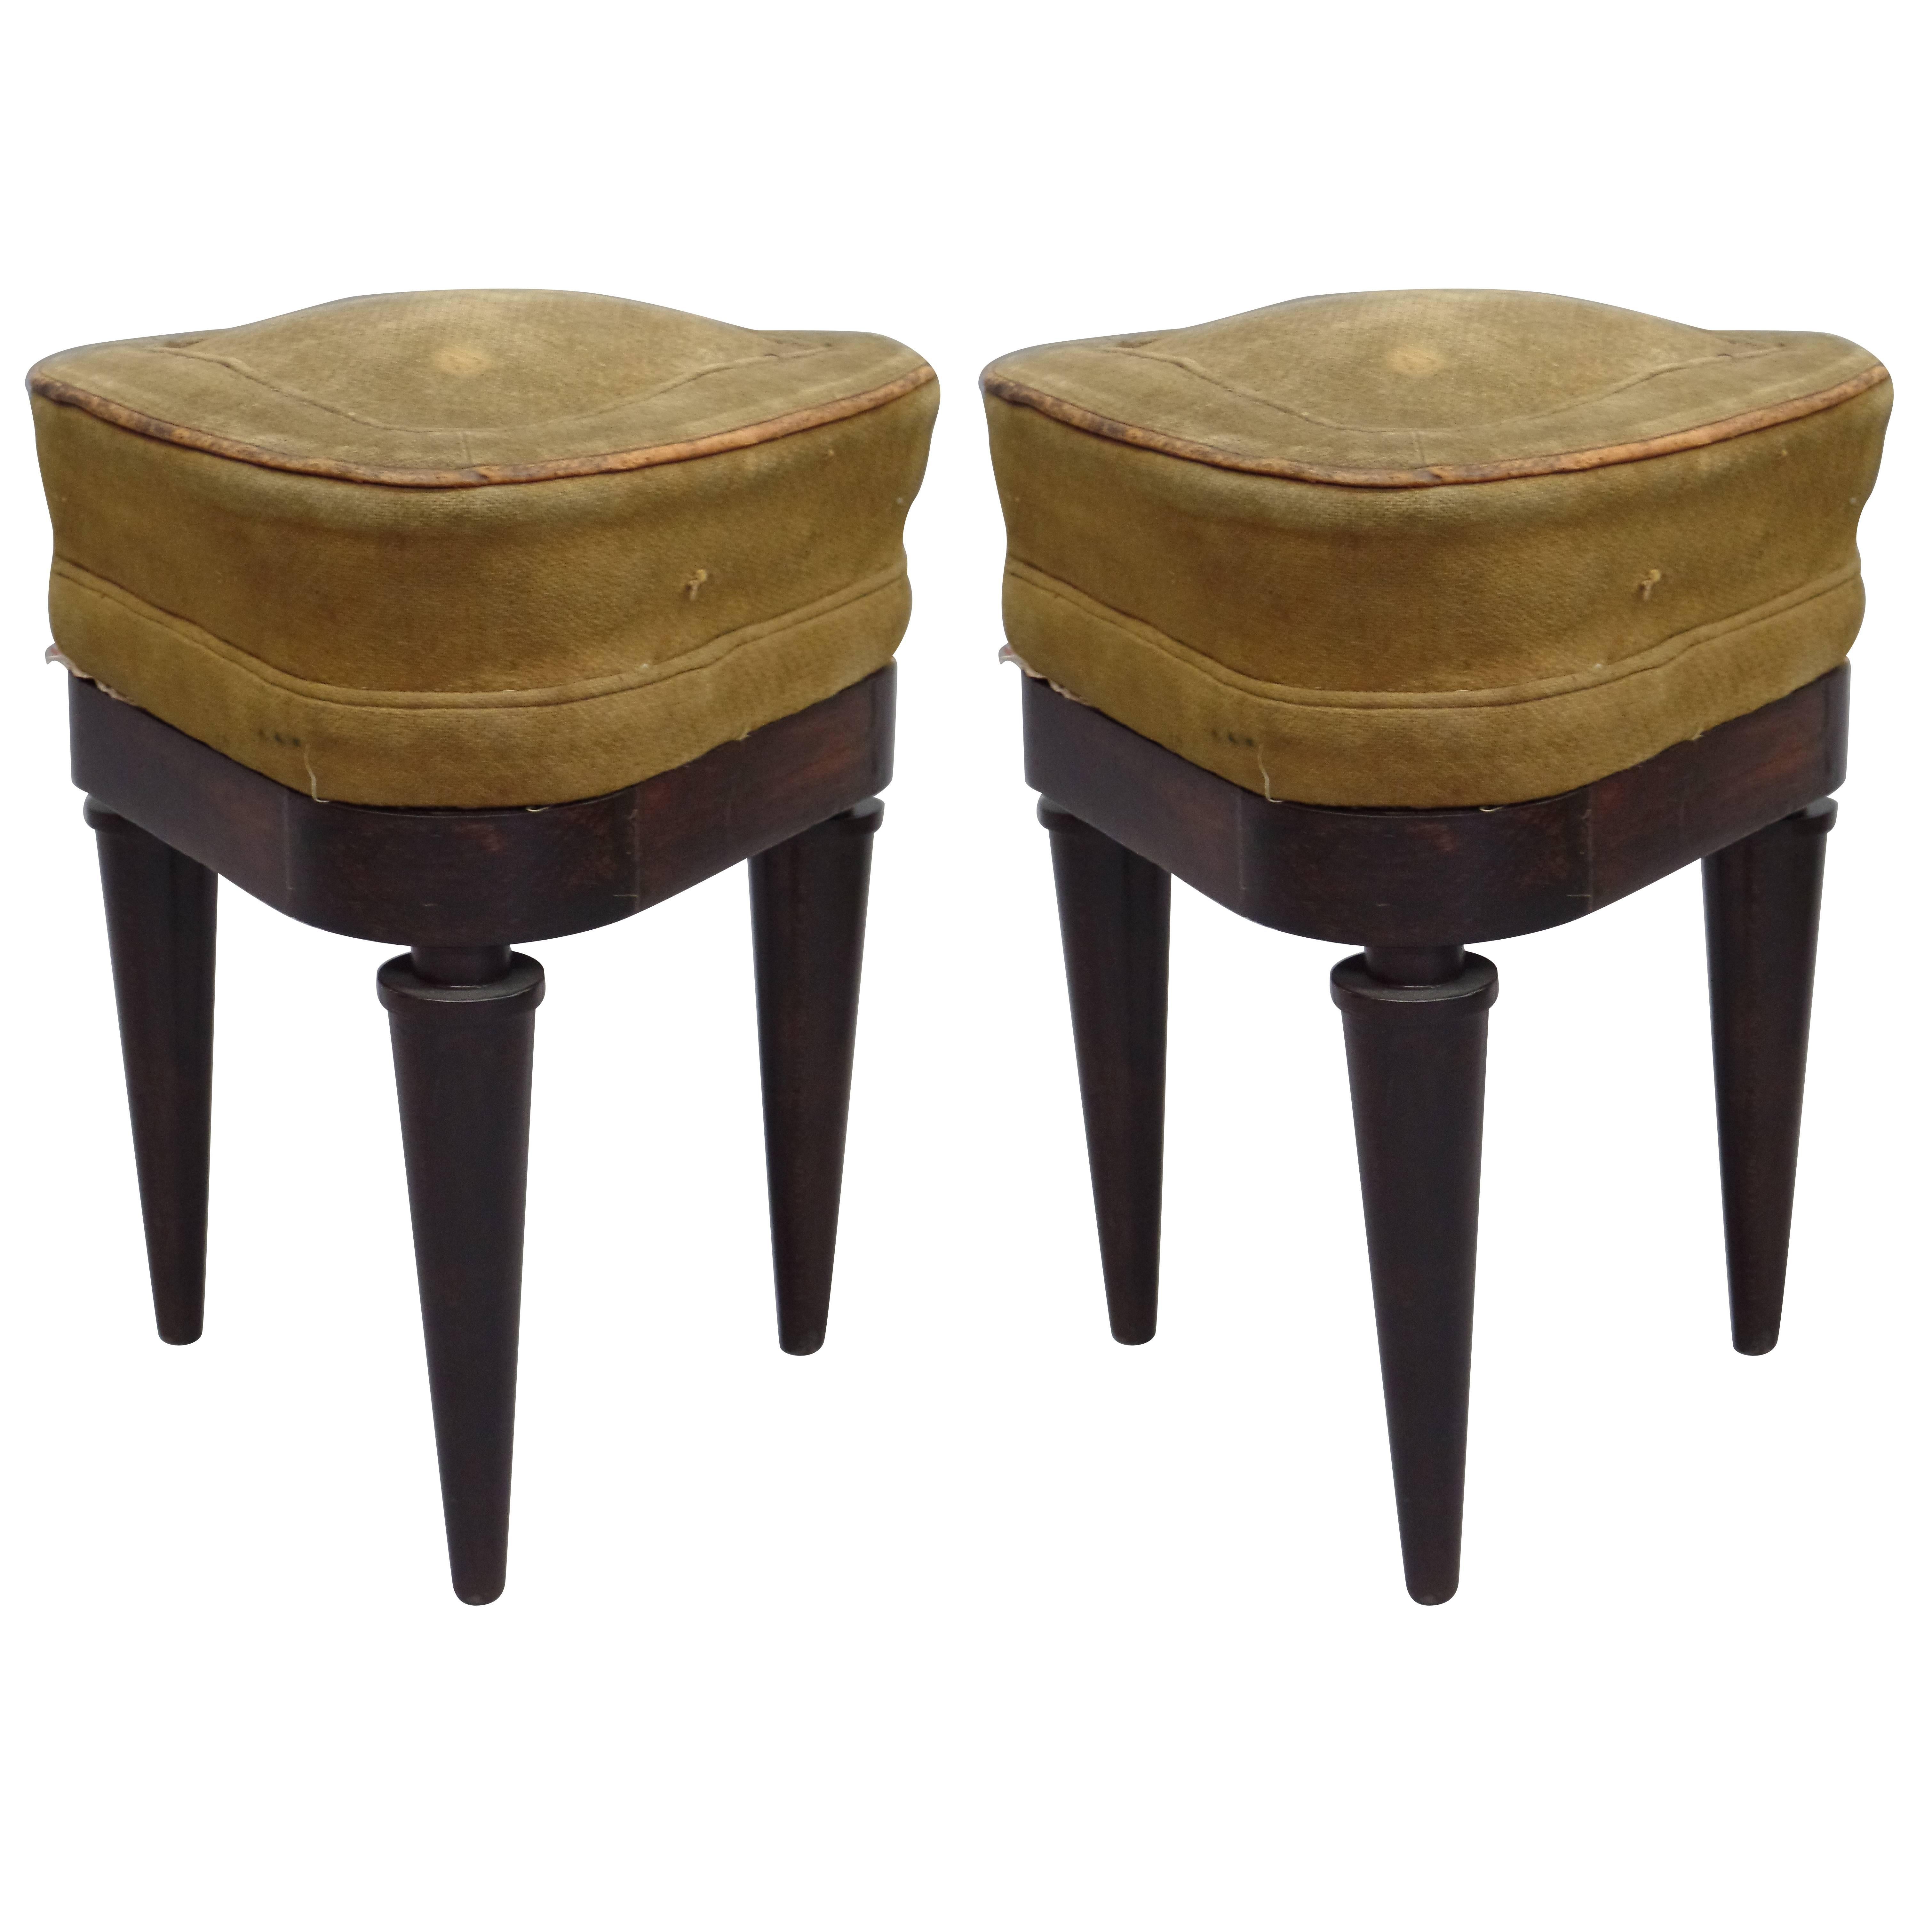 French Modern Neoclassical Mahogany and Suede Tri-Corner Stools, Andre Arbus For Sale